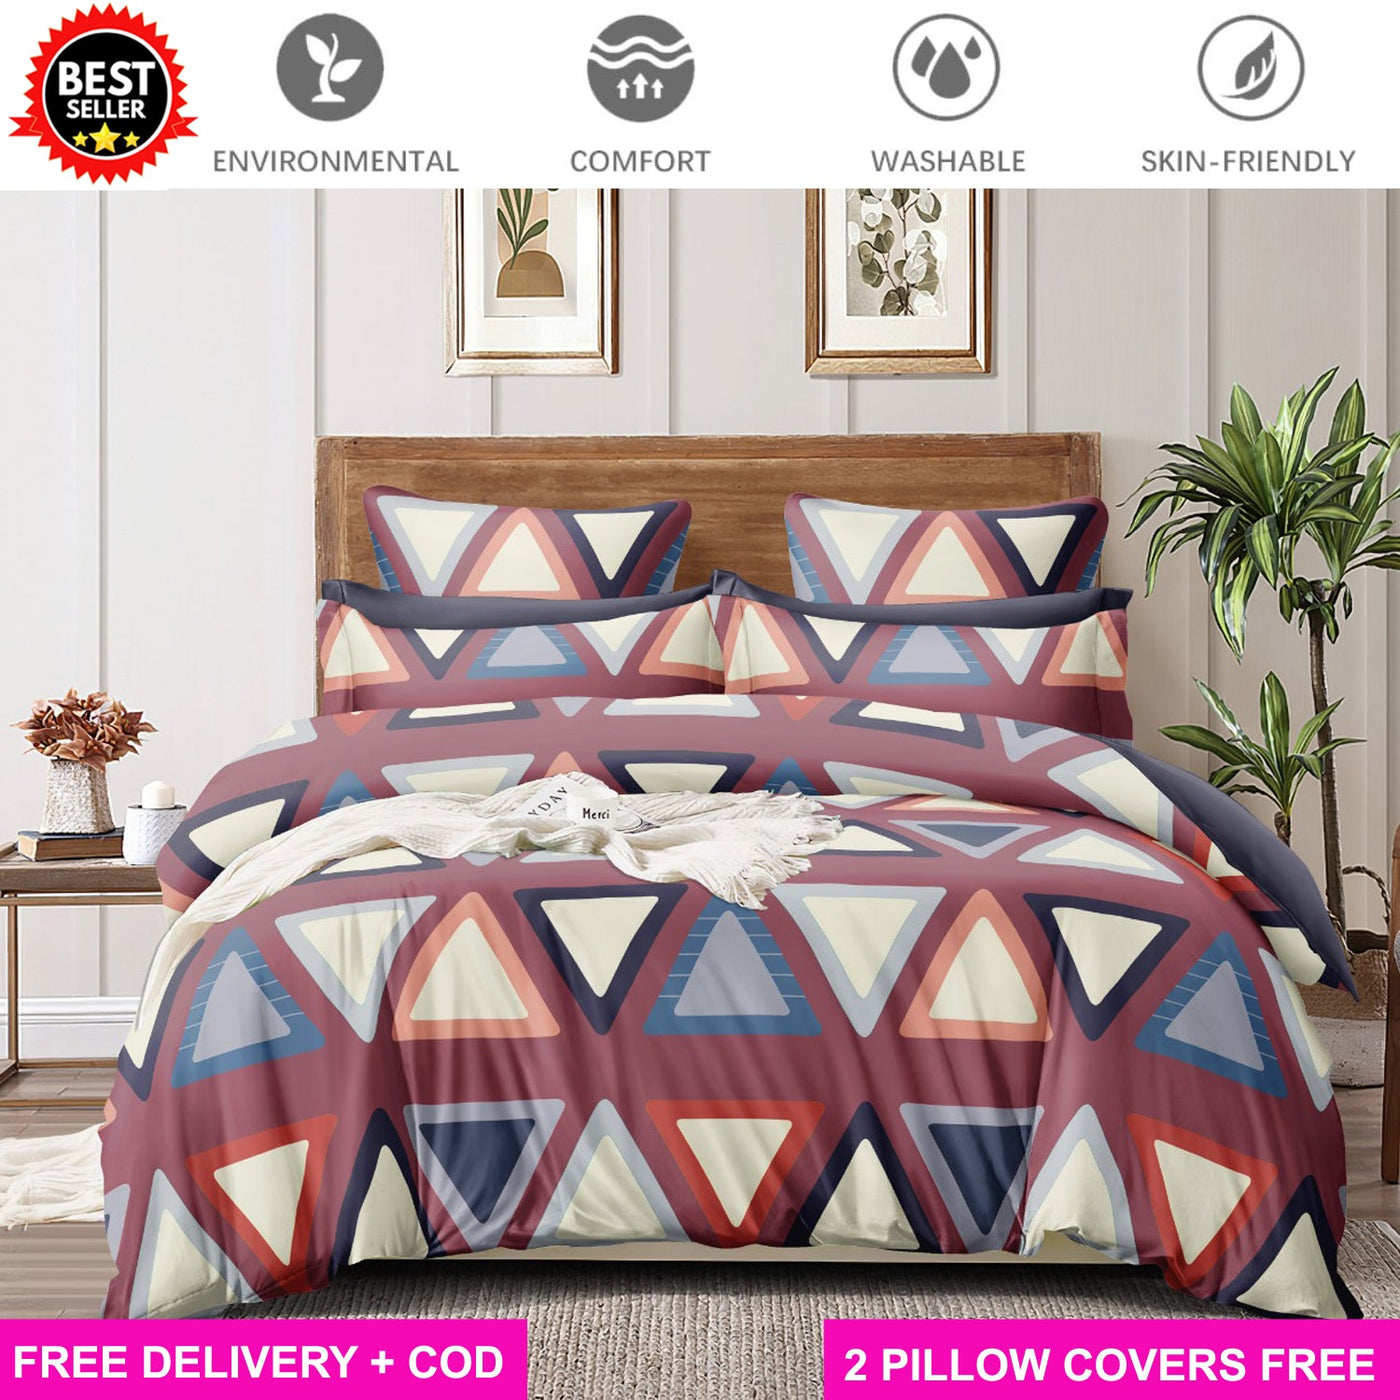 Cotton Elastic Fitted King Size Bedsheet with 2 Pillow Covers - Fits with any Beds & Mattresses Great Happy IN Maroon Triangle KING SIZE 